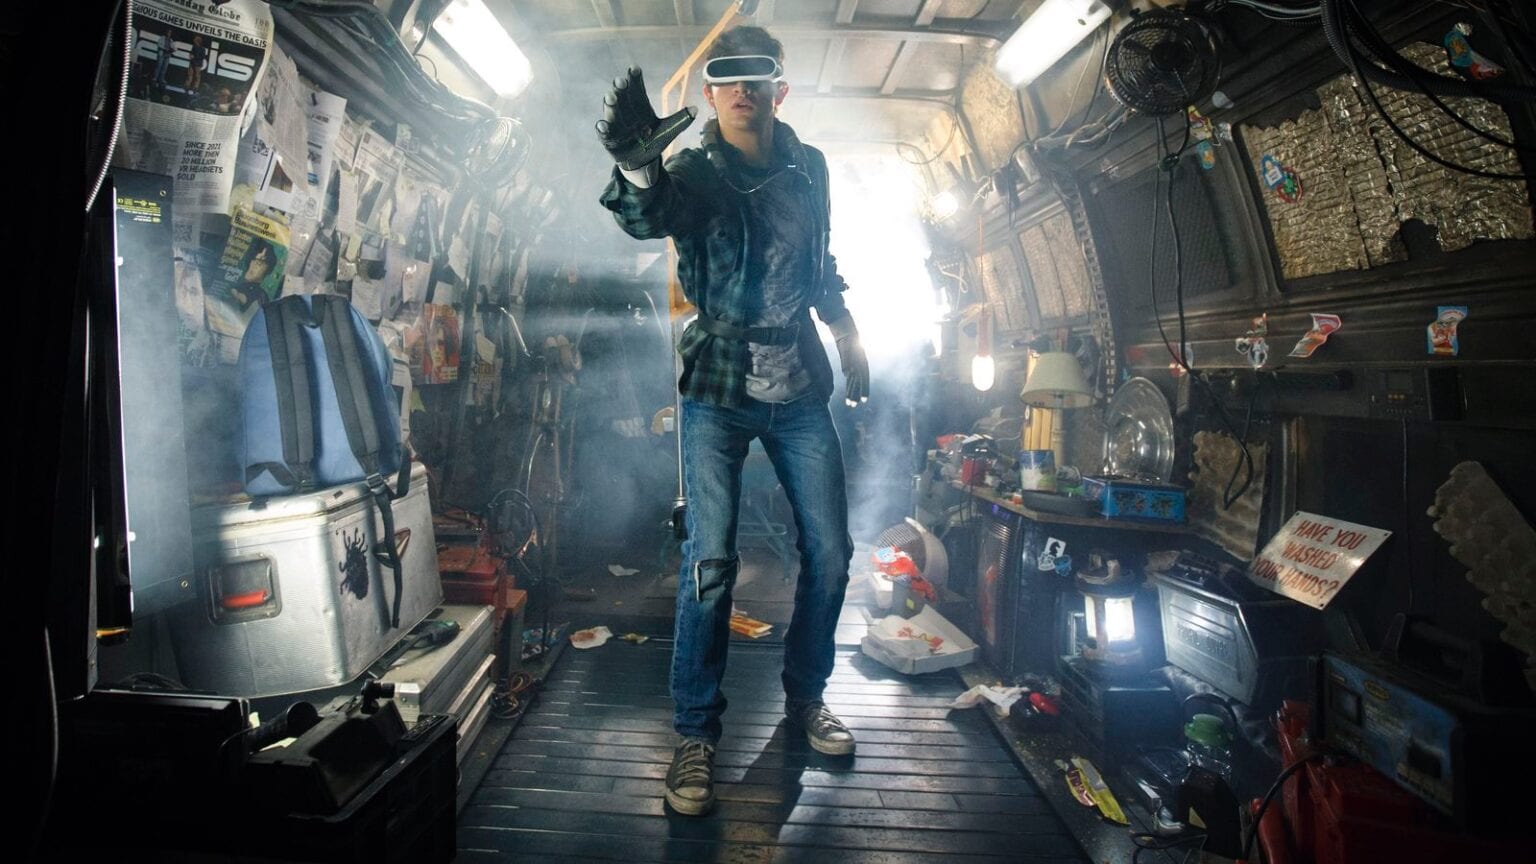 Don’t expect the Apple VR headset to be the first step in re-creating Ready Player One by delivering a full metaverse.